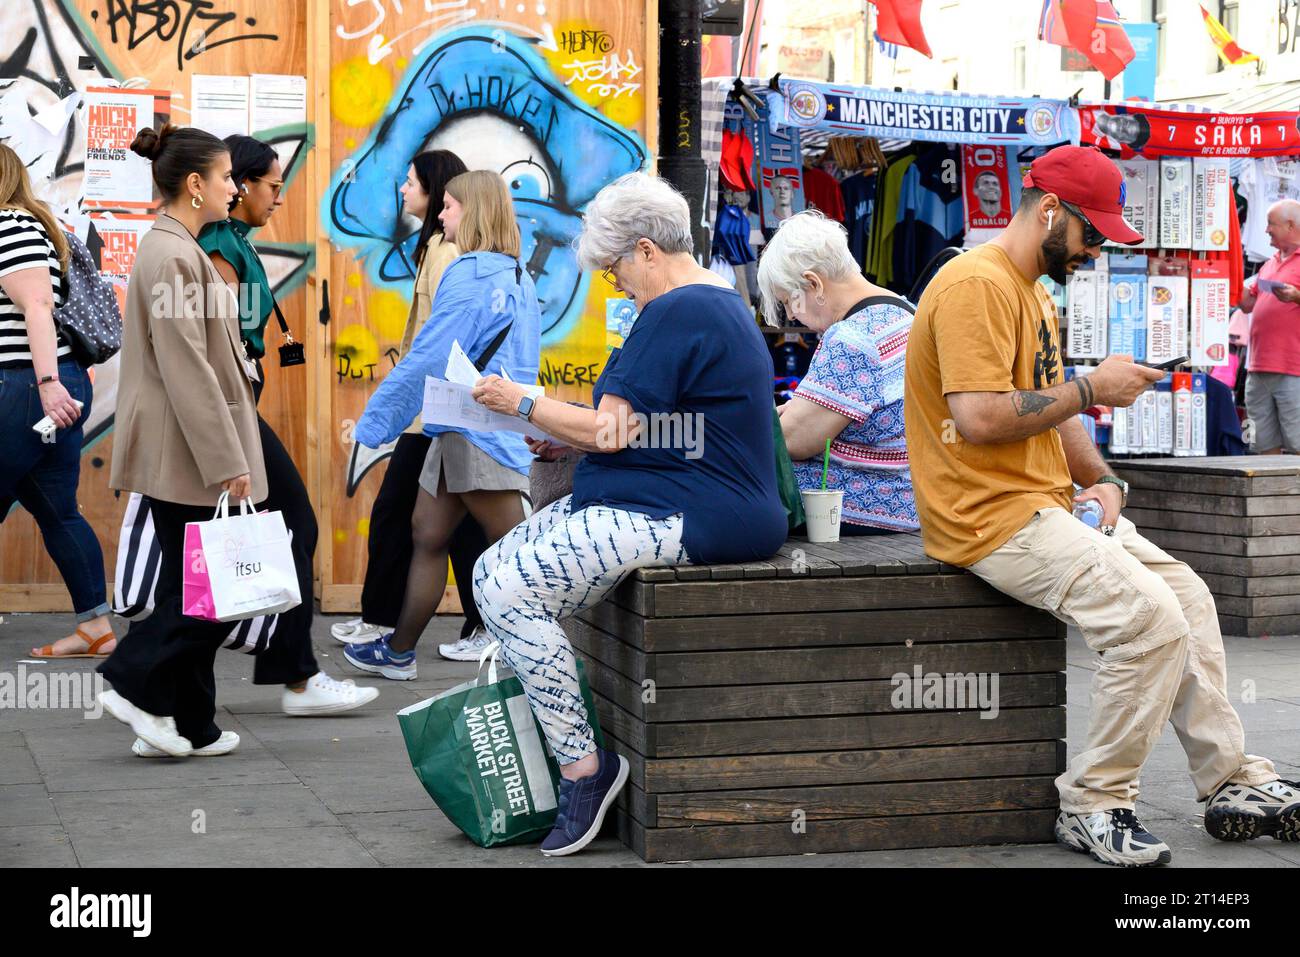 London,UK. Camden Town - people sitting in Camden High Street, looking at a map / mobile phone Stock Photo